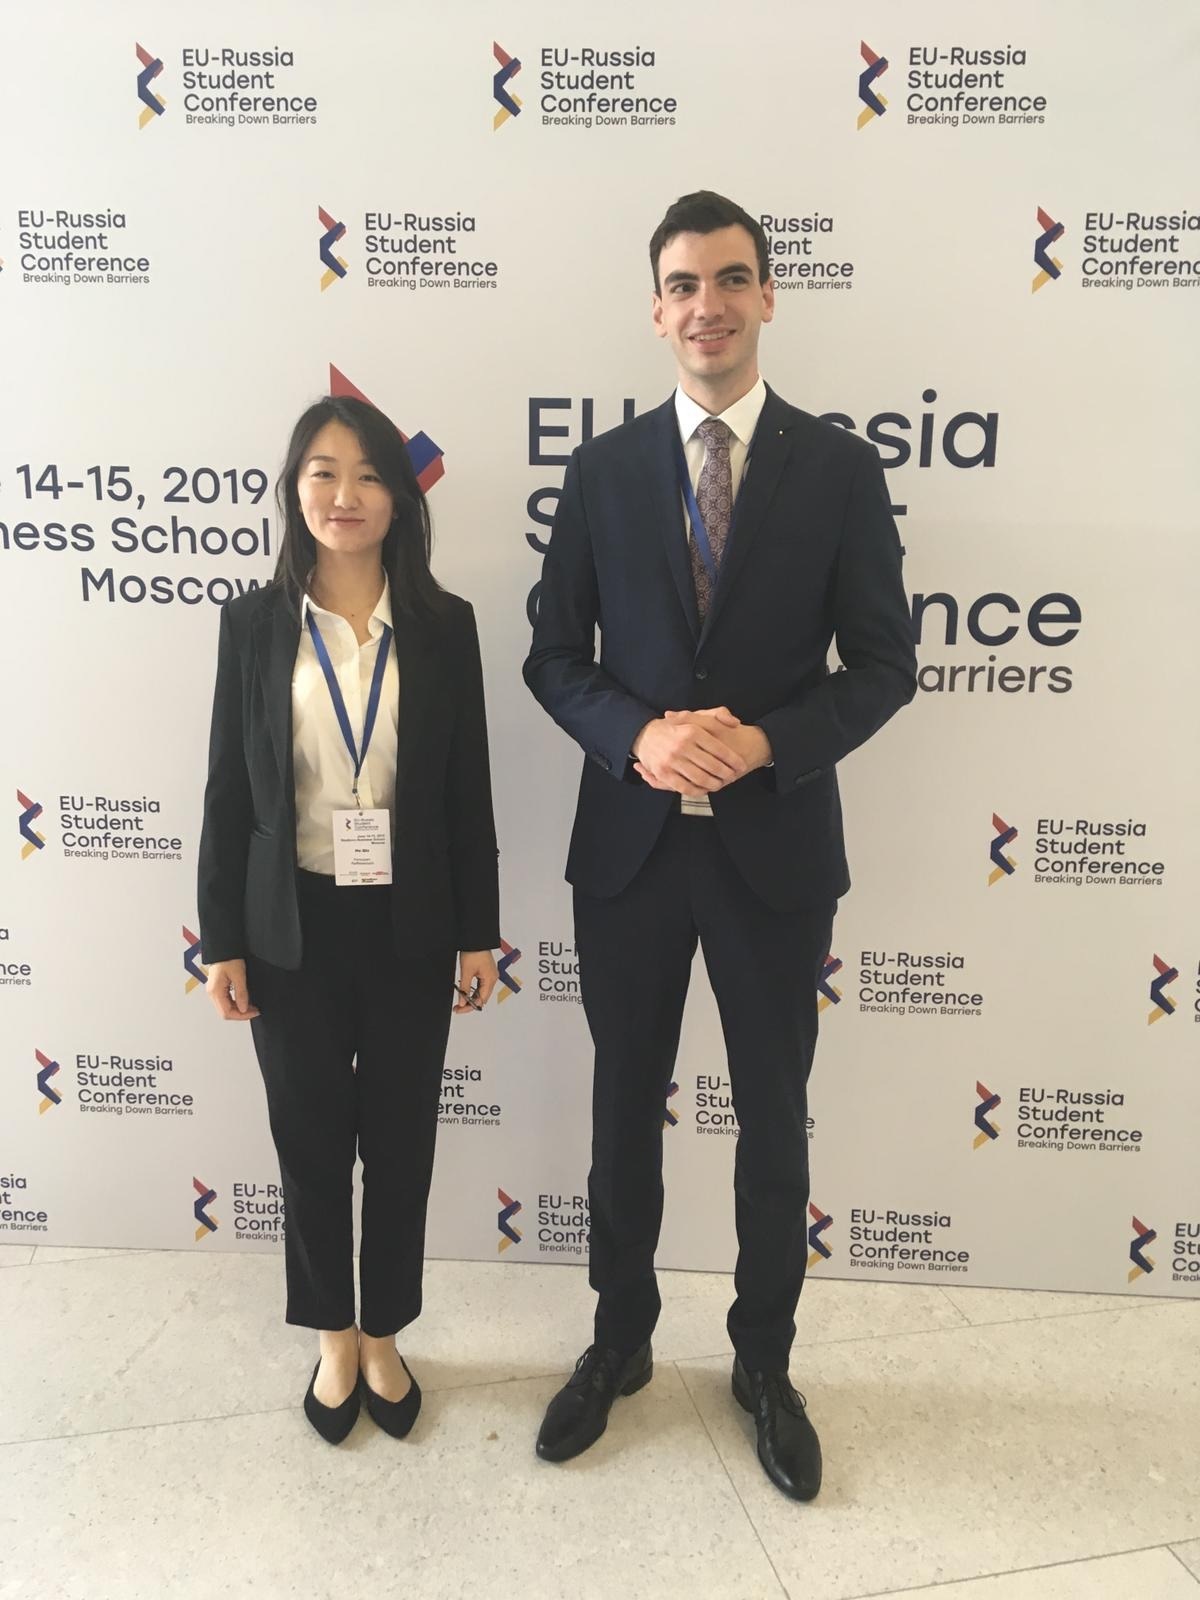 Qin He & Welter Lennart at EU-Russia Conference